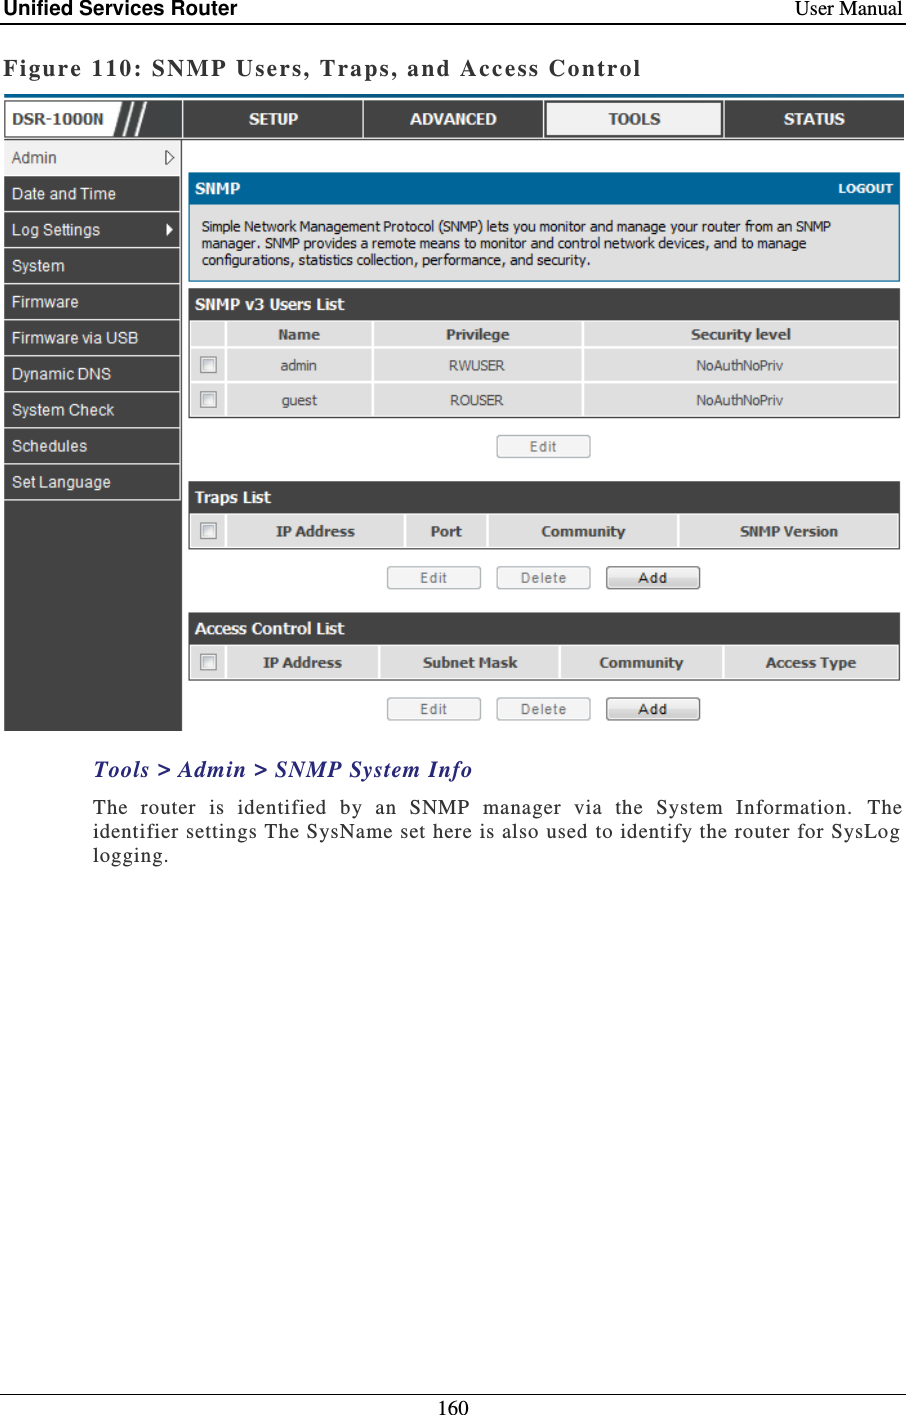 Unified Services Router    User Manual 160  Figure 110:  SNMP Users, Traps, a nd Access Control   Tools &gt; Admin &gt; SNMP System Info The  router  is  identified  by  an  SNMP  manager  via  the  System  Information.   The identifier settings The SysName set here is also used to identify the router for SysLog logging.  